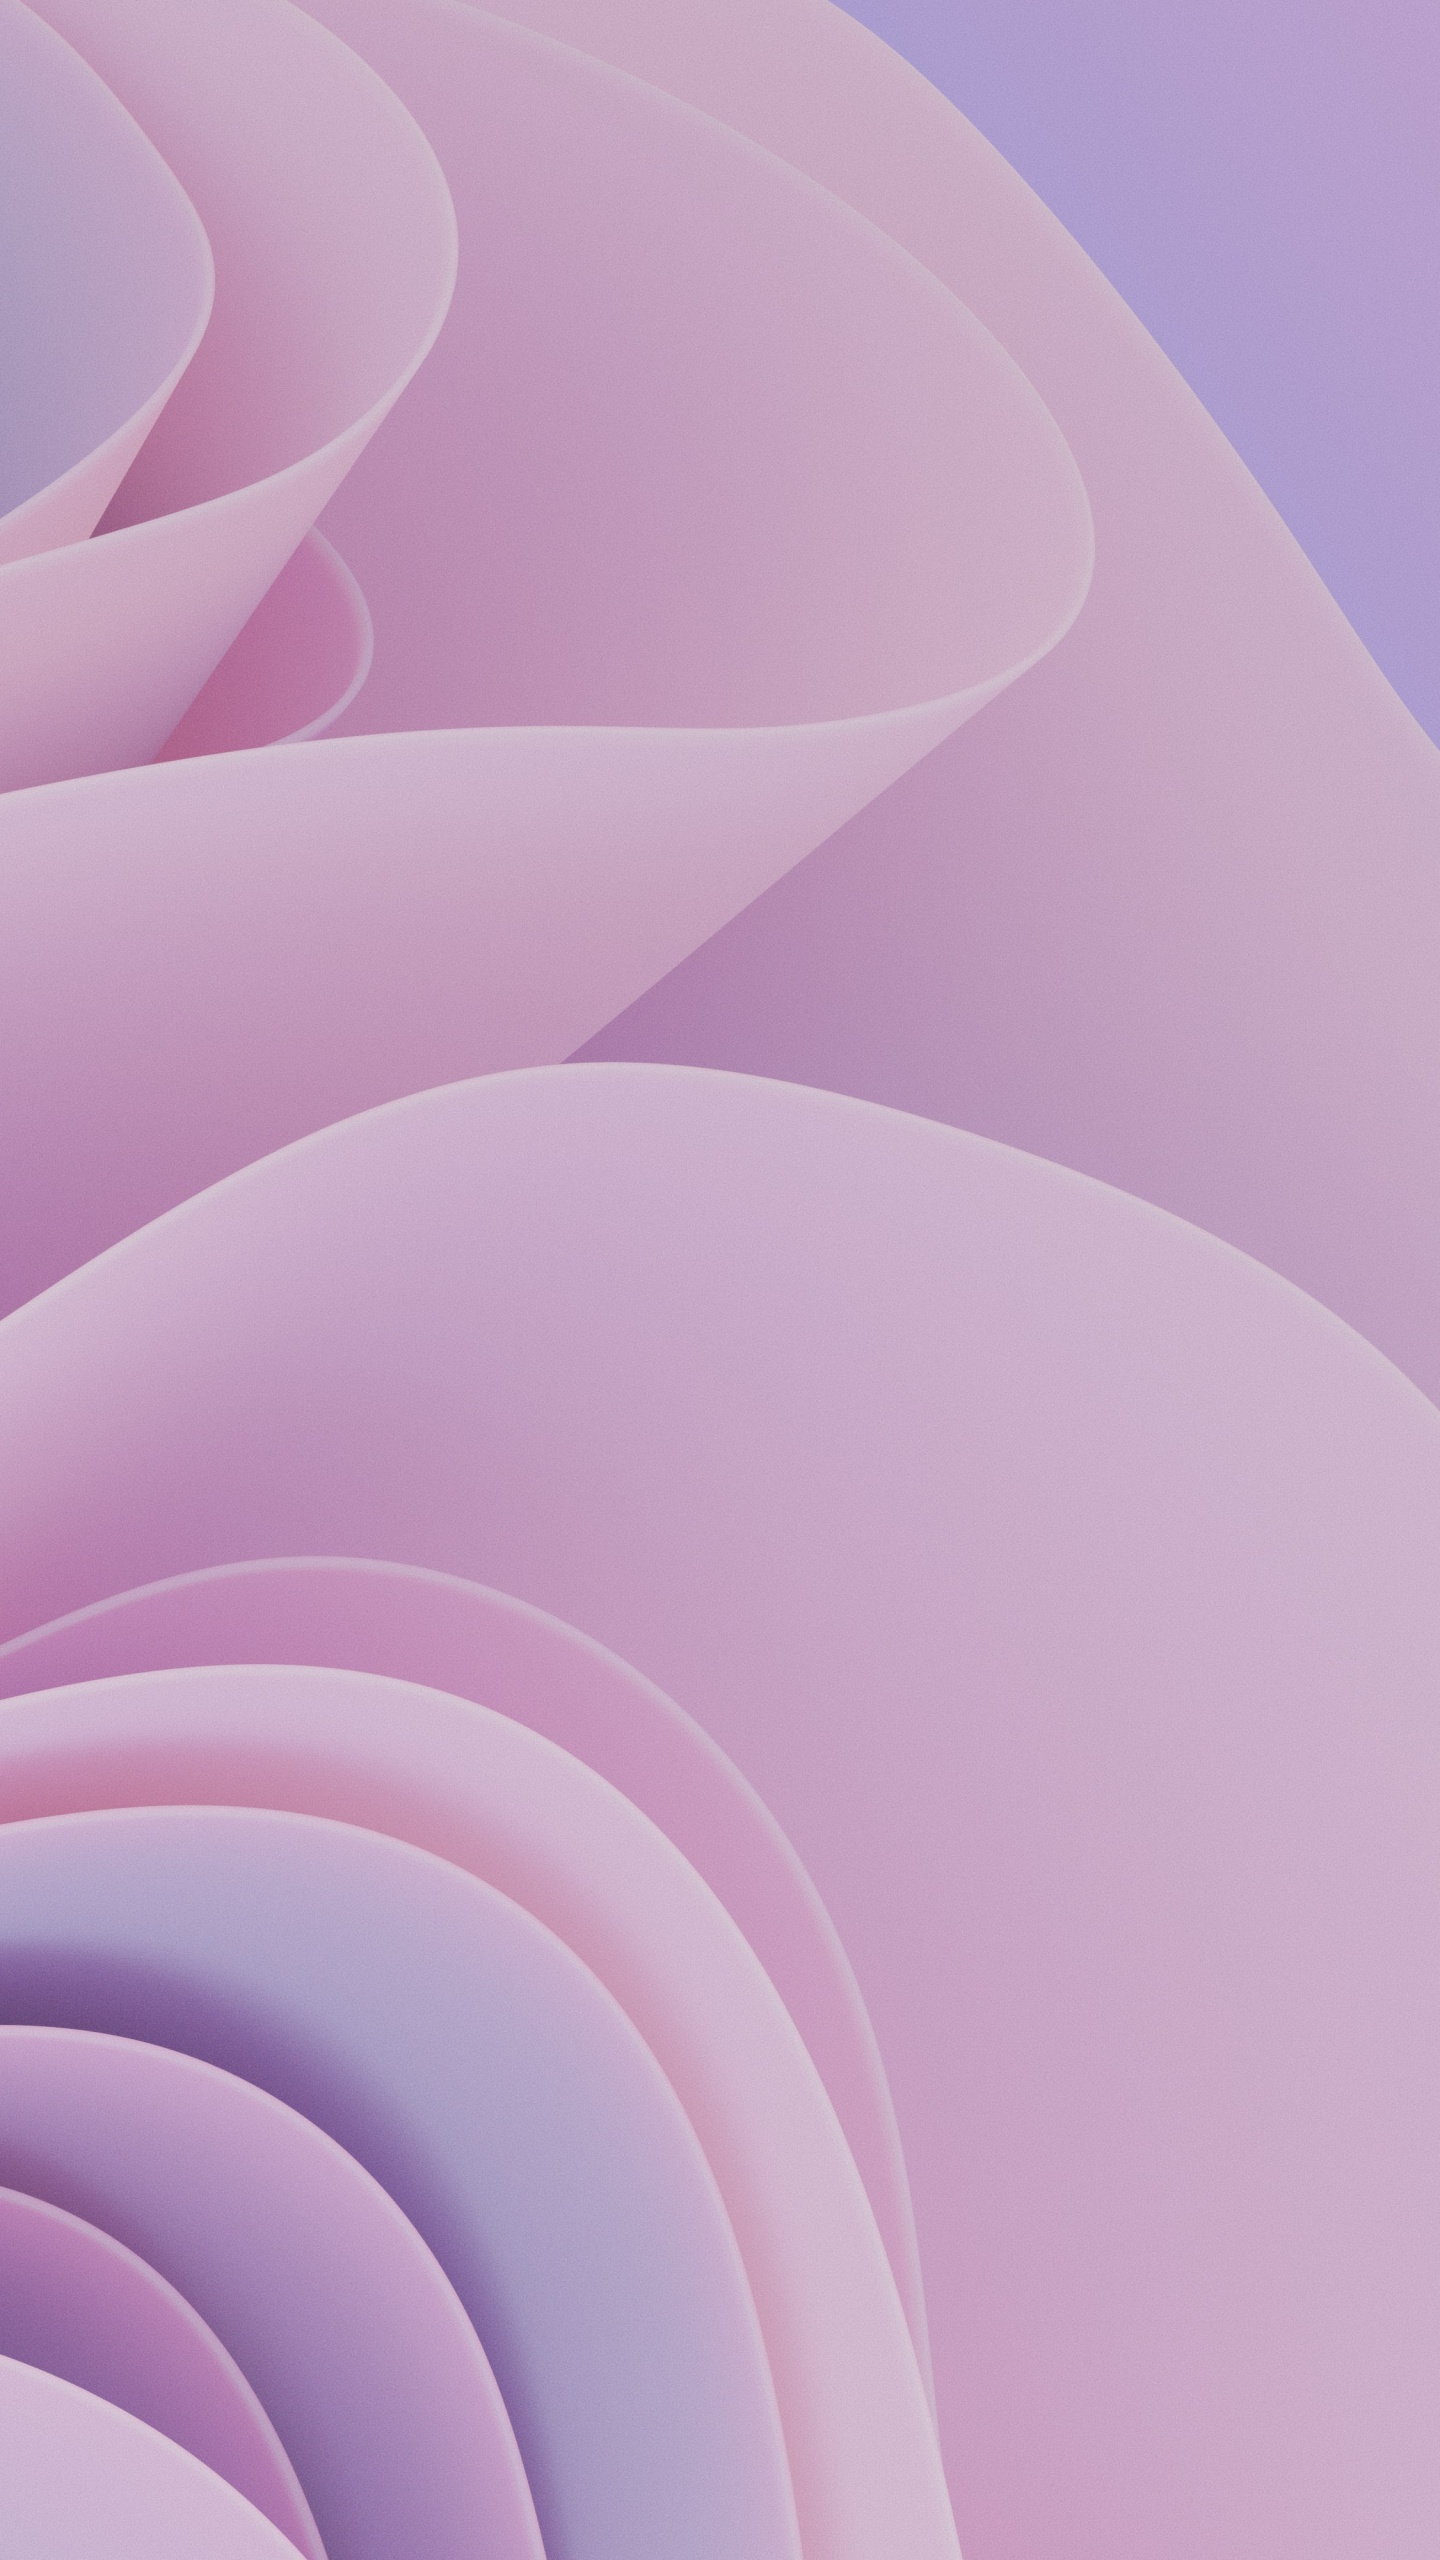 3D Render Wallpaper 4K, Waves, Girly, Abstract, #7041